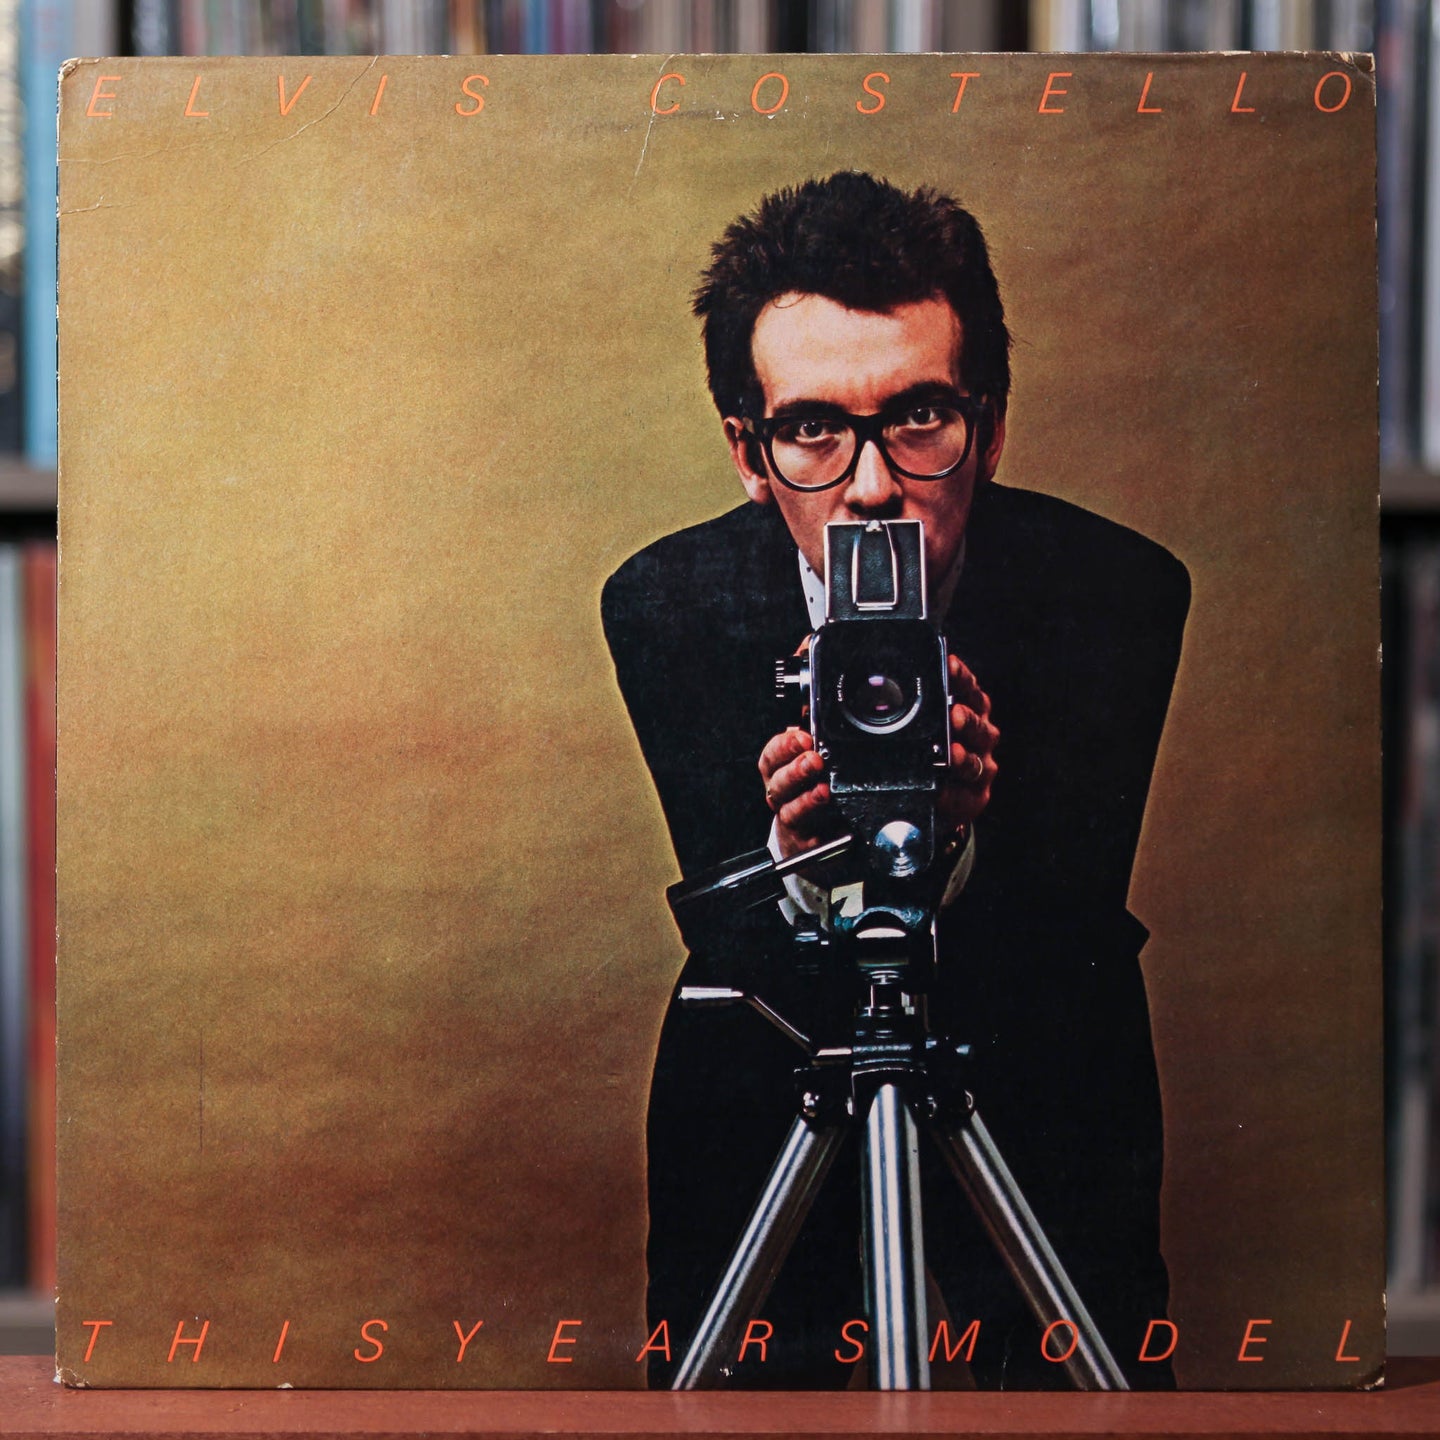 Elvis Costello - This Year's Model - 1978 Columbia, VG/VG+